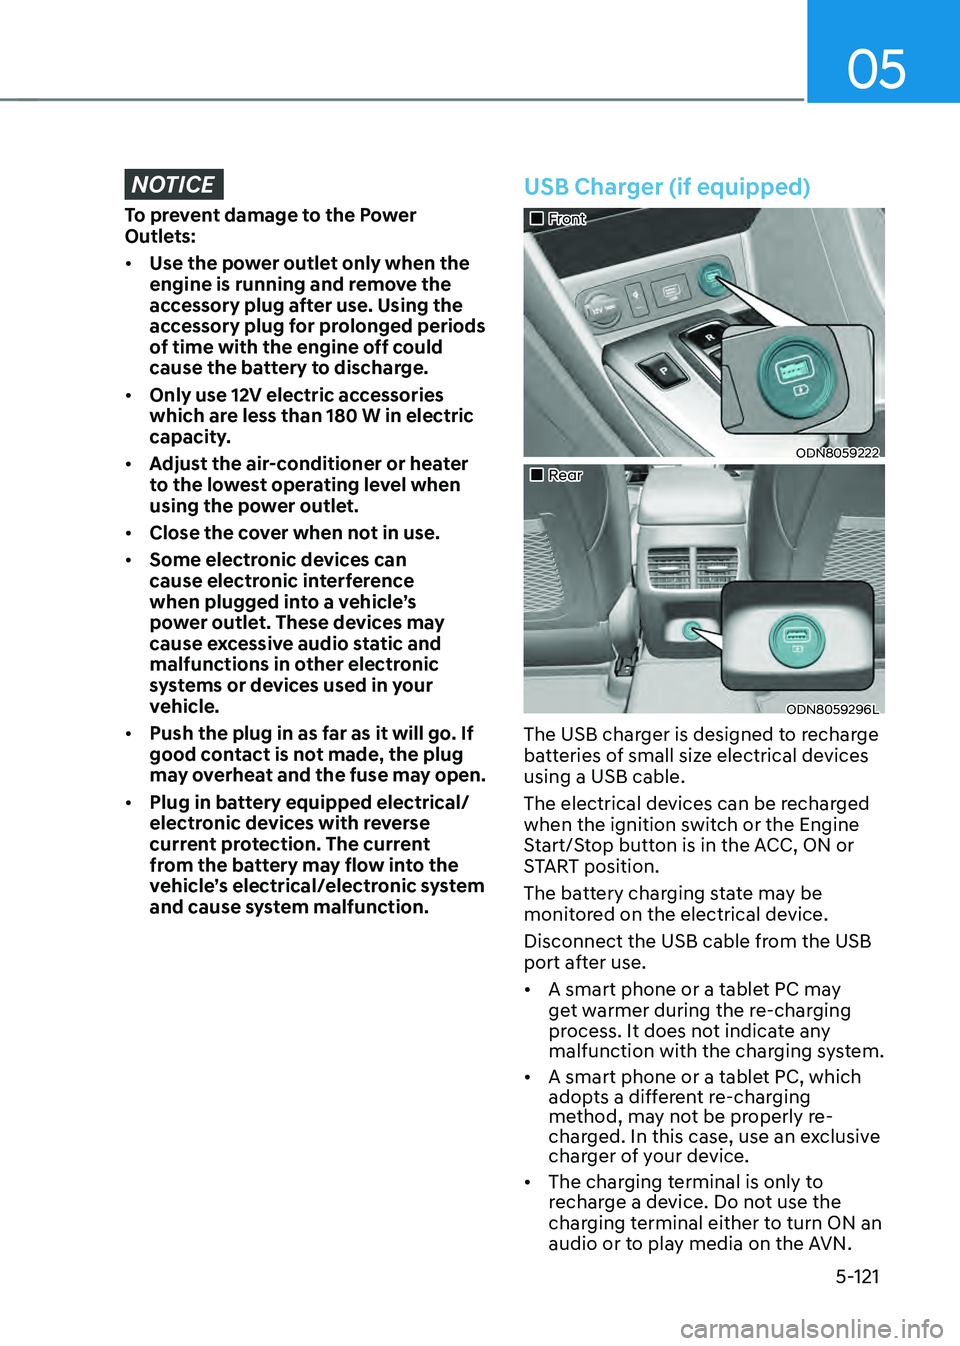 HYUNDAI SONATA HYBRID 2020  Owners Manual 05
5-121
NOTICE
To prevent damage to the Power 
Outlets:
•	Use the power outlet only when the 
engine is running and remove the 
accessory plug after use. Using the 
accessory plug for prolonged per